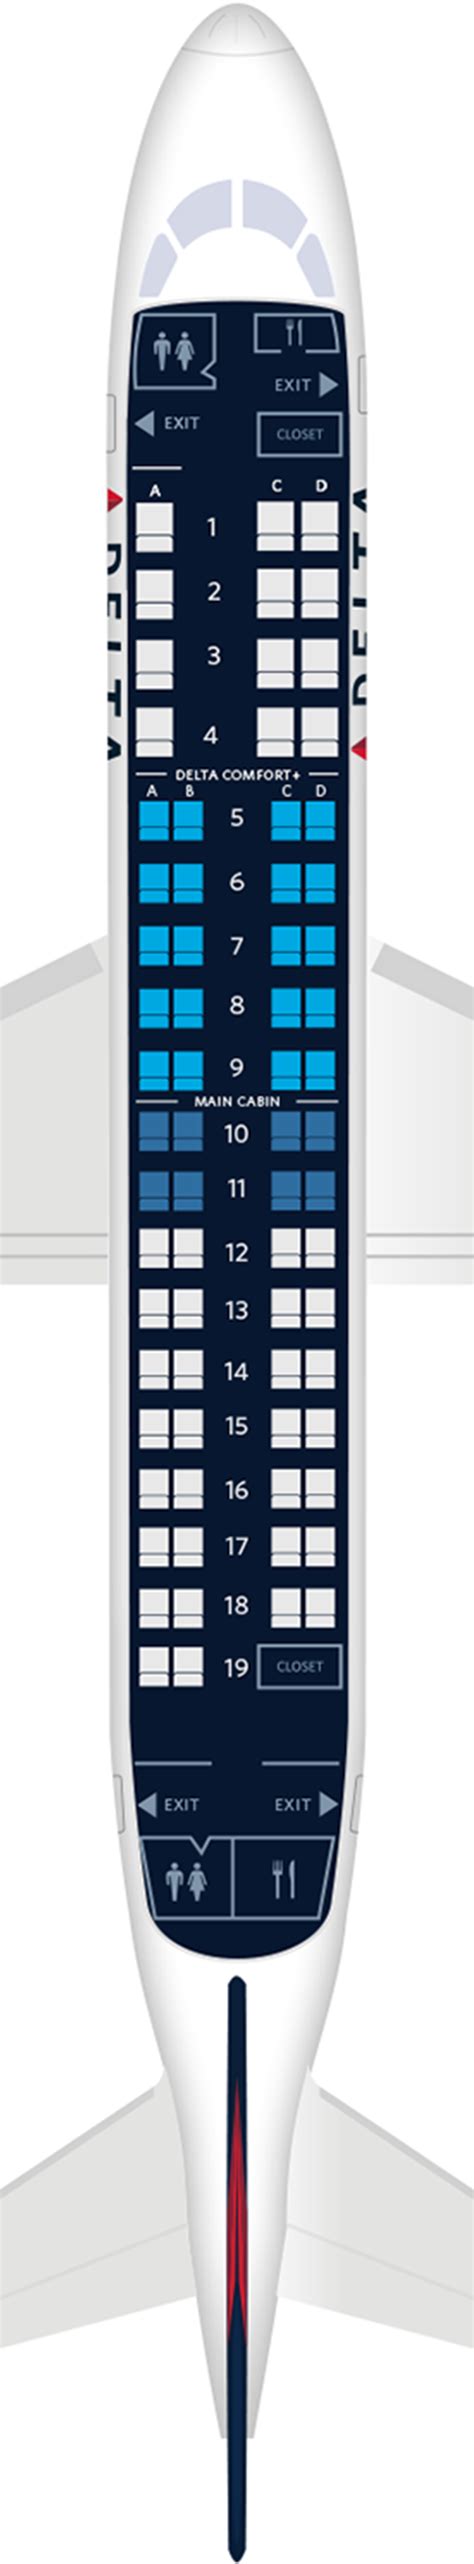 embraer 175 seating chart